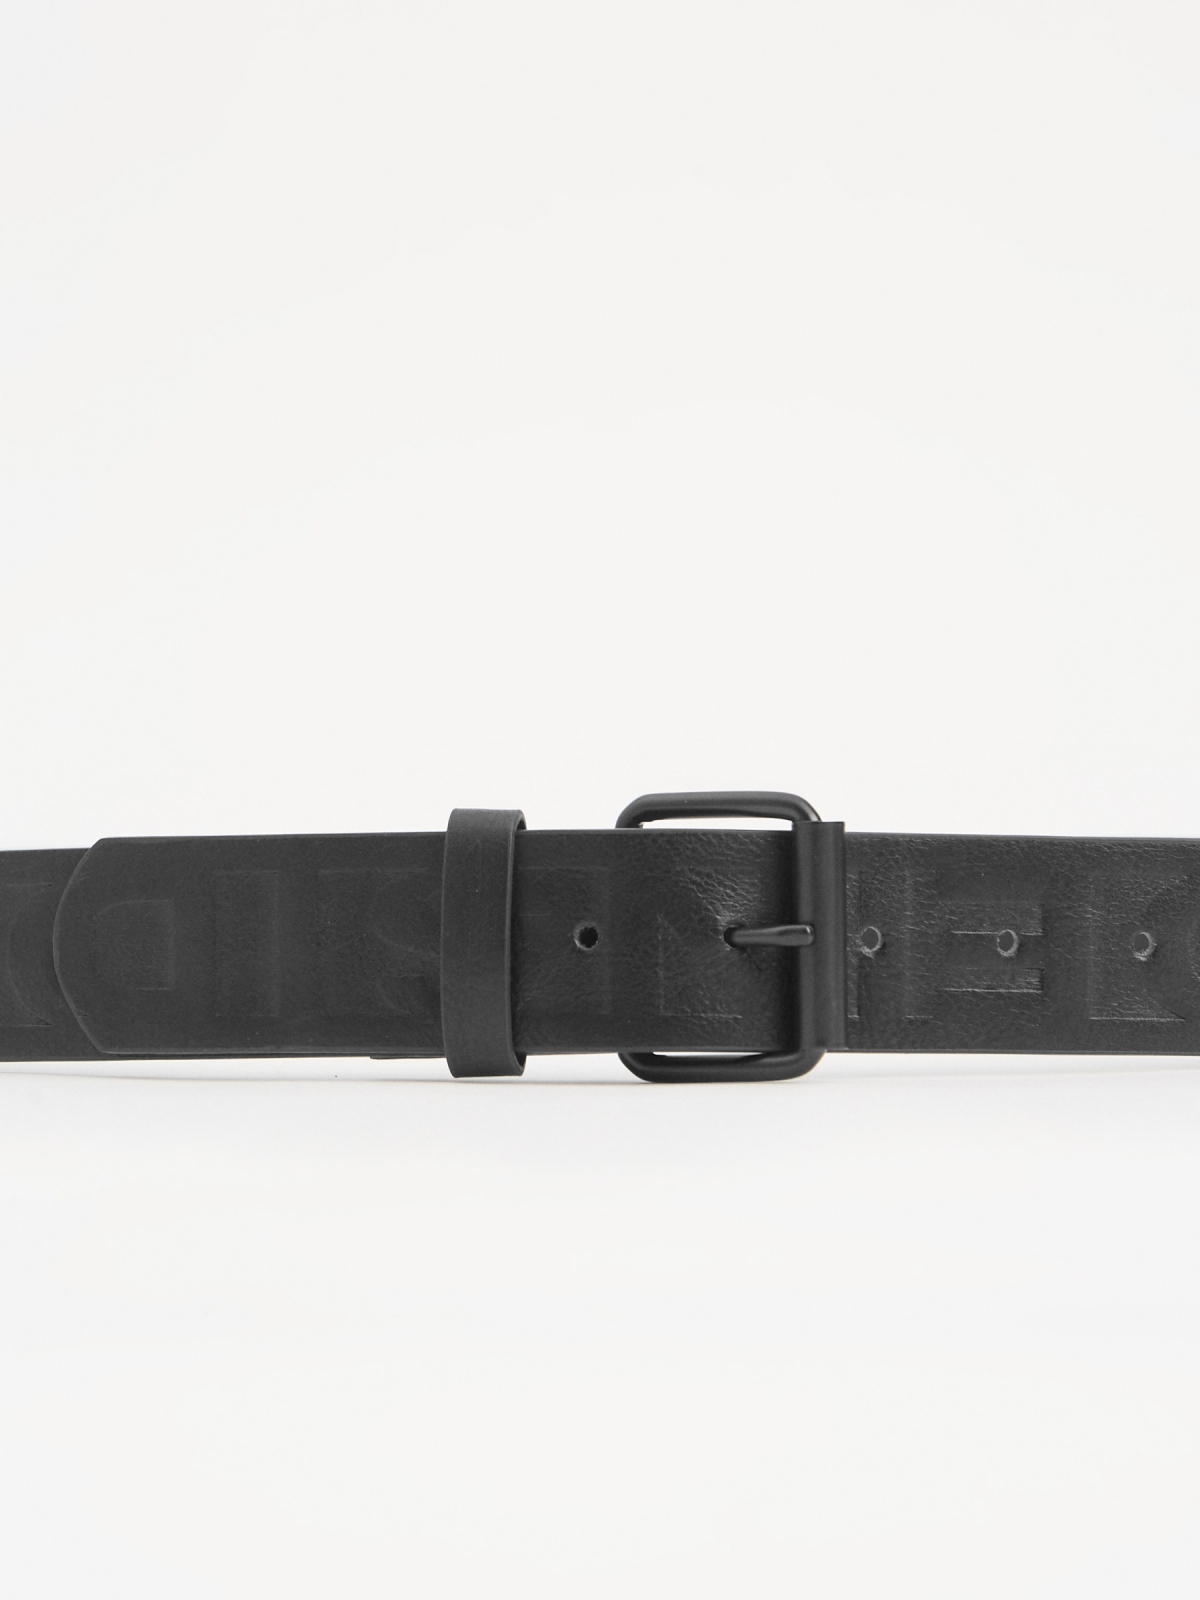 Engraved leather effect belt black with a model